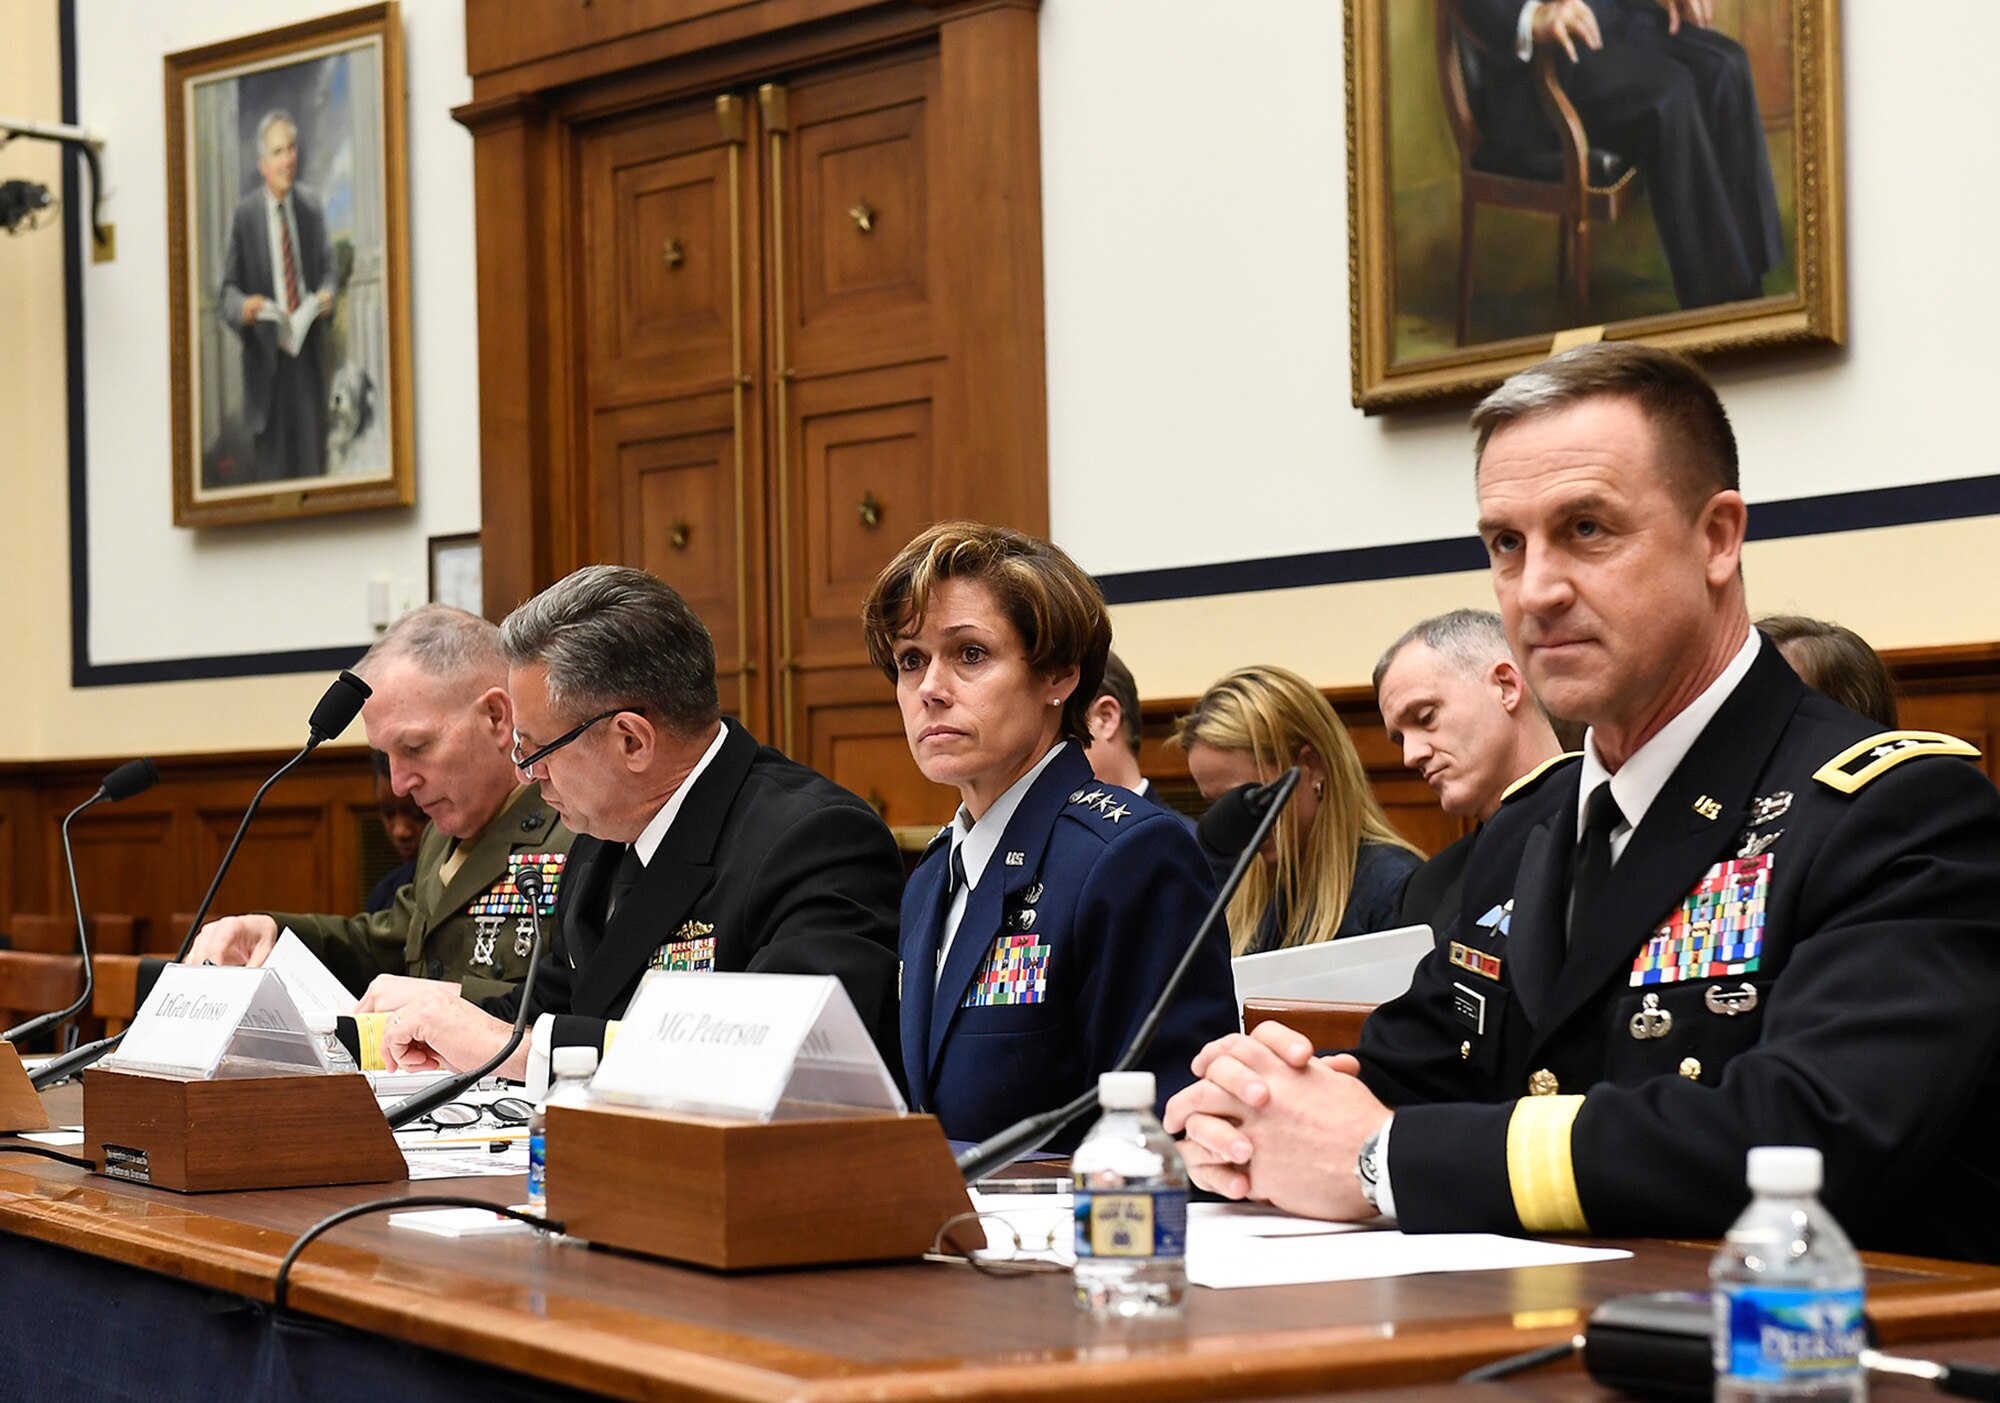 Lt. Gen. Gina Grosso, the Air Force deputy chief of staff for manpower, personnel and services, testifies before the House Armed Services subcommittee on Military Personnel about the nation's pilot shortage March 29, 2017, in Washington, D.C.  Grosso testified with Marine Corps Lt. Gen. Mark Brilakis, the deputy commandant for manpower and reserve affairs; Navy Vice Adm. Robert Burke, the chief of naval personnel; and Army Maj. Gen. Erik Peterson, the director of Army aviation.  (U.S. Air Force photo/Scott M. Ash)